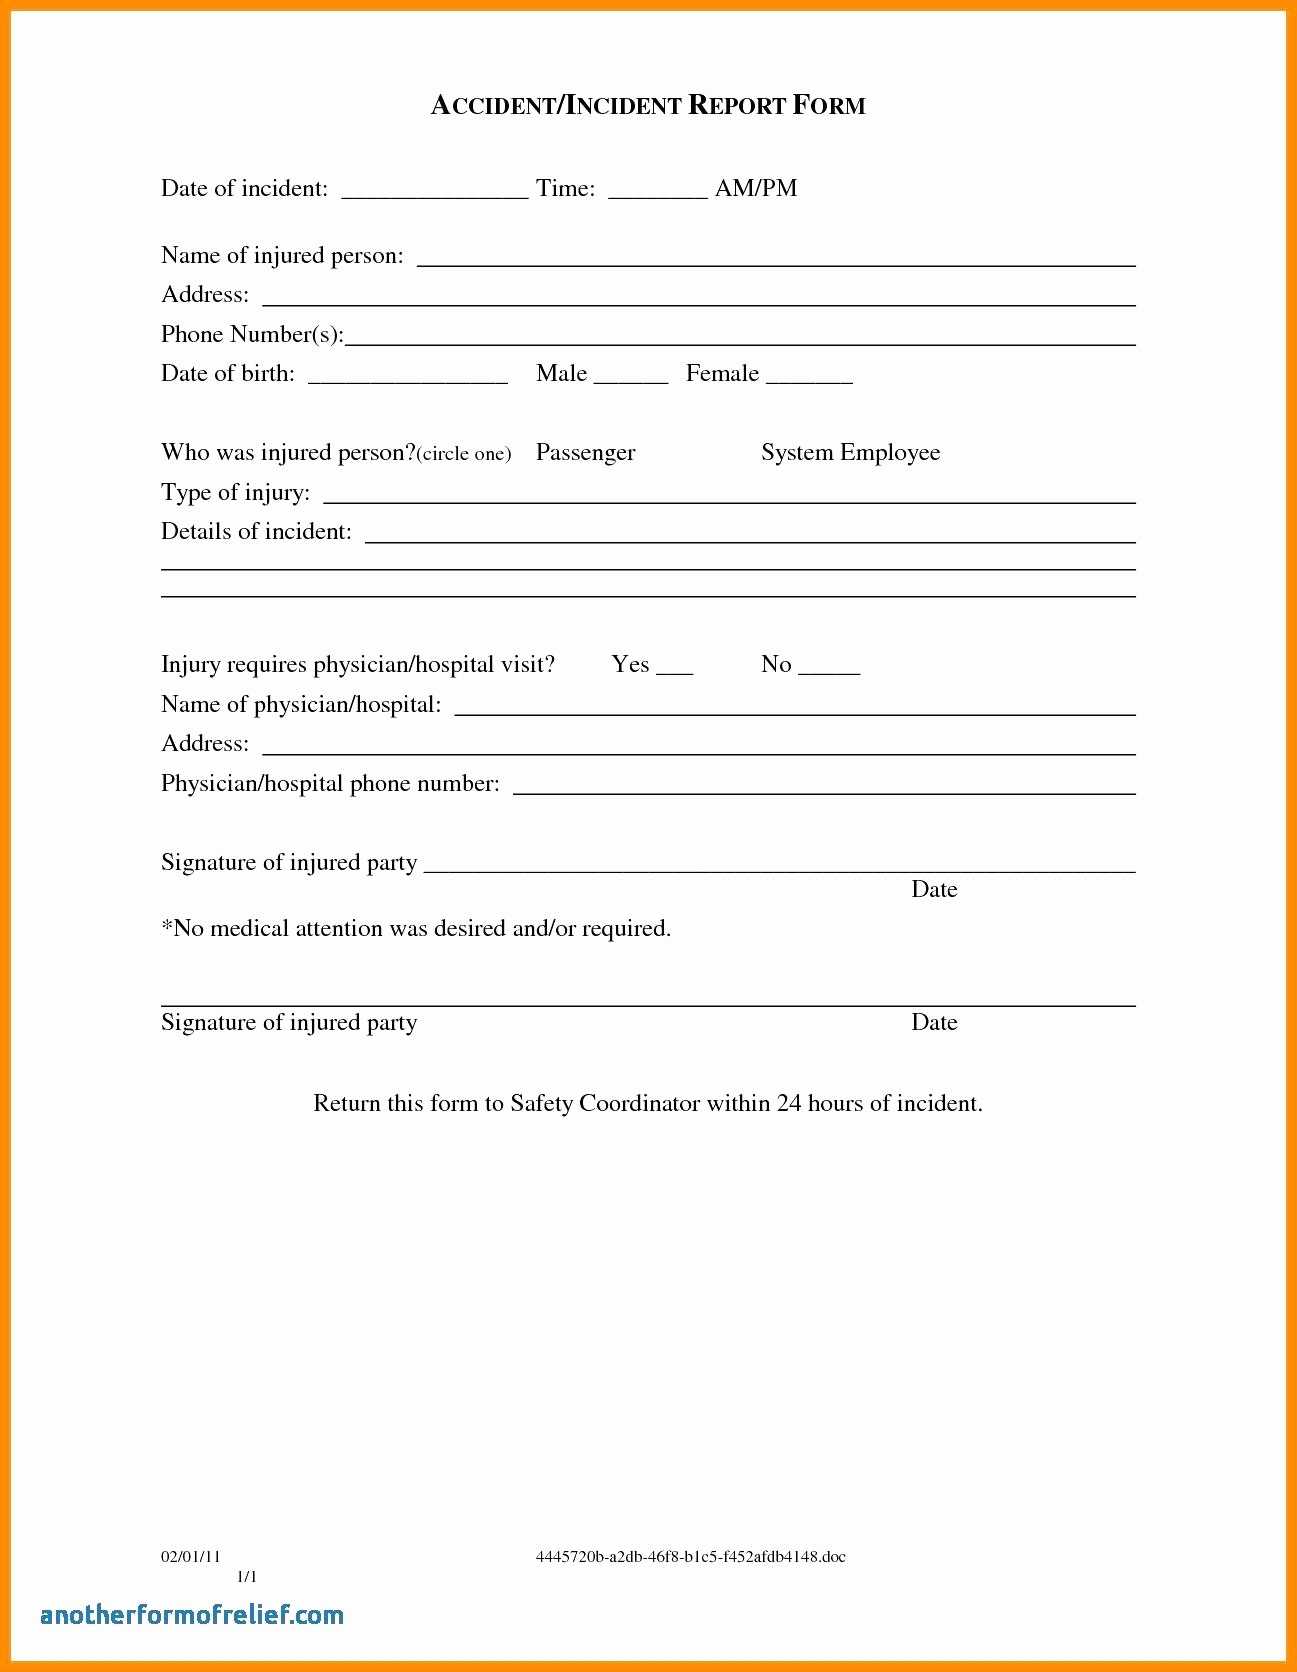 003 Template Ideas Incident Reportm Accidentms Hazard Pertaining To Incident Hazard Report Form Template